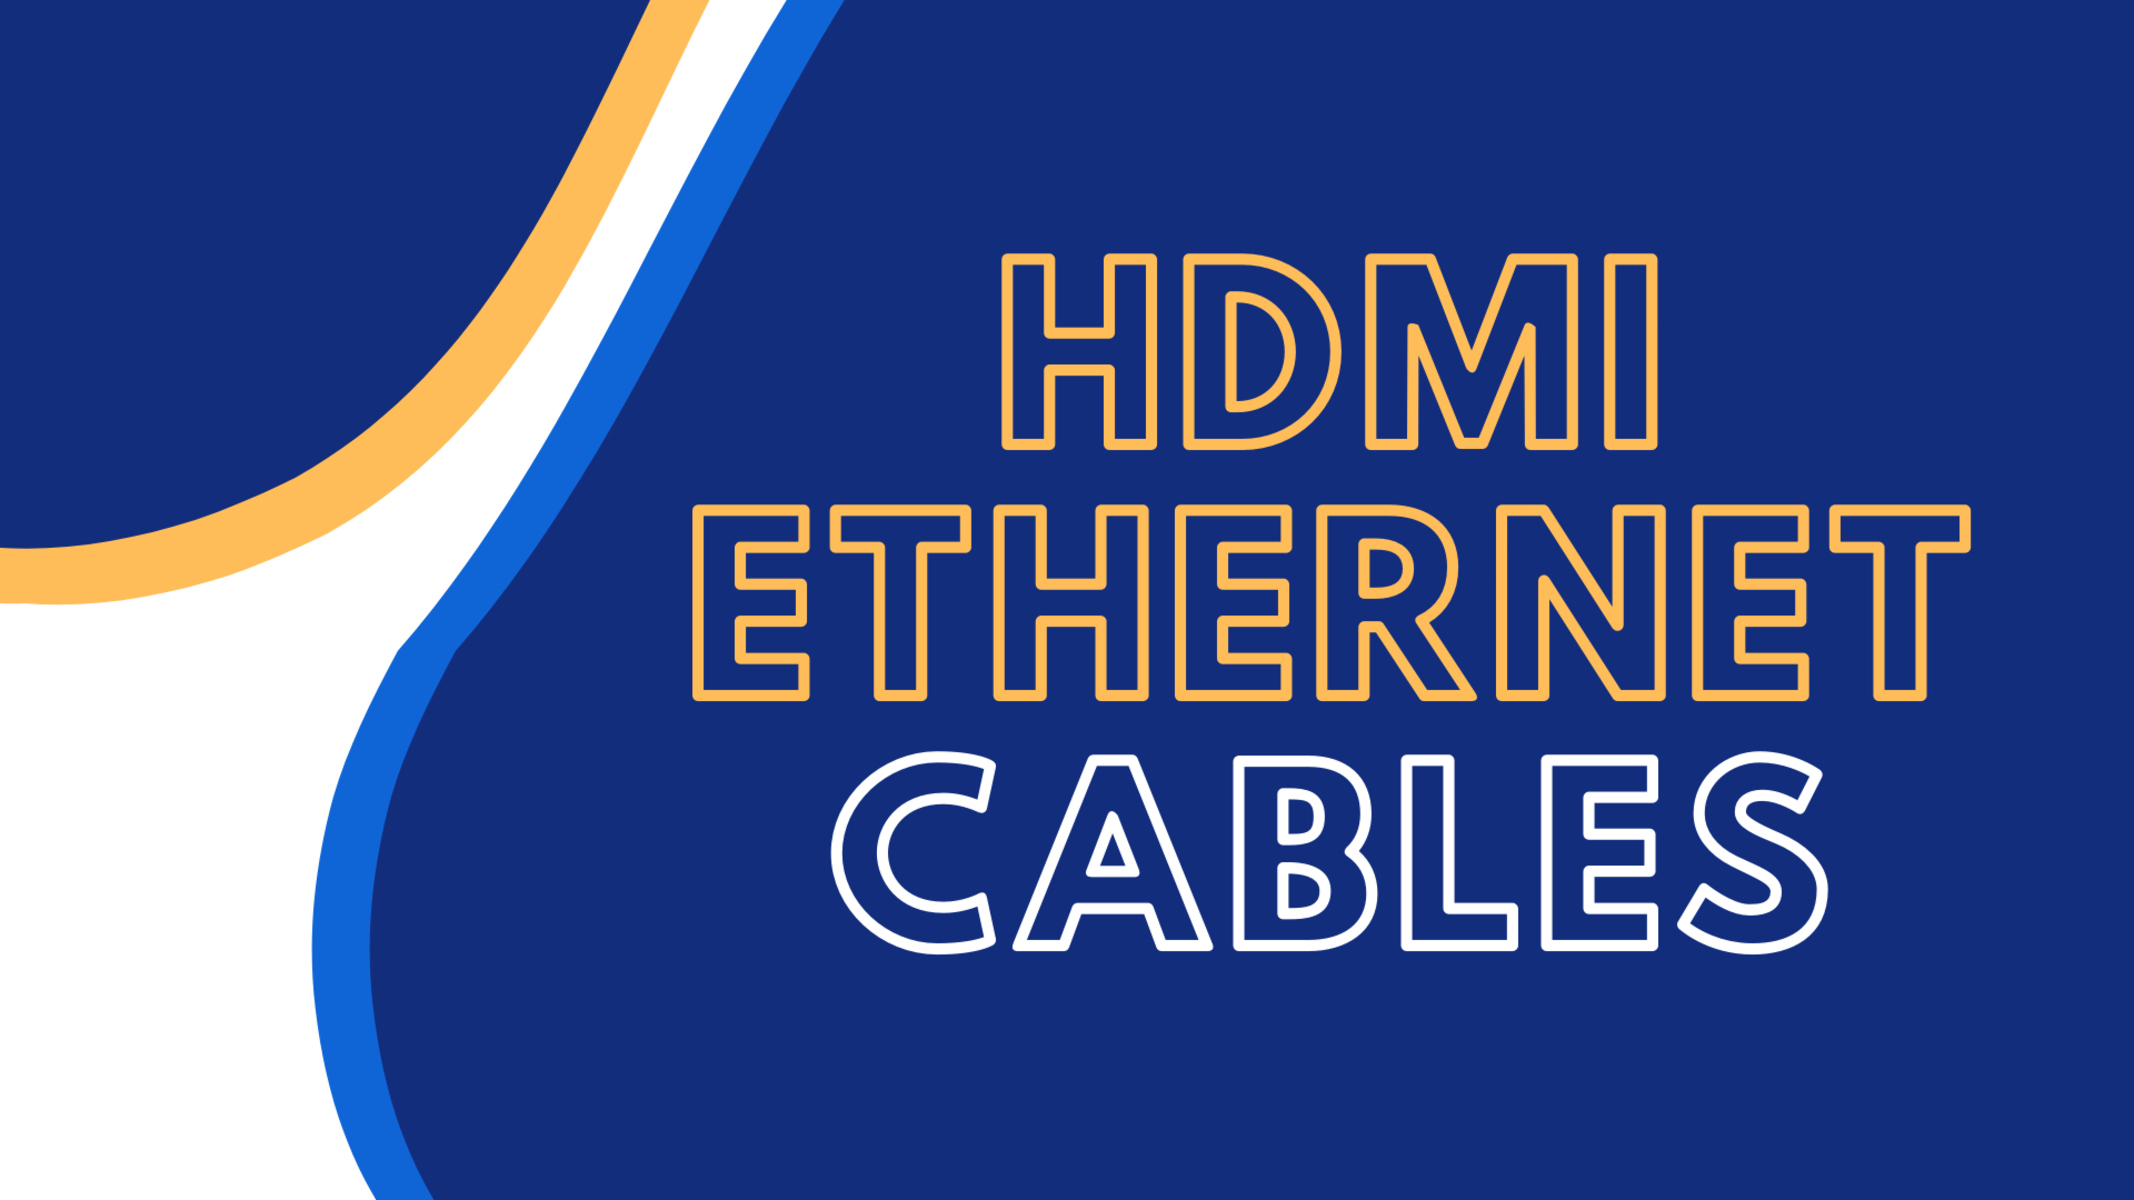 What Is HDMI Ethernet Cable